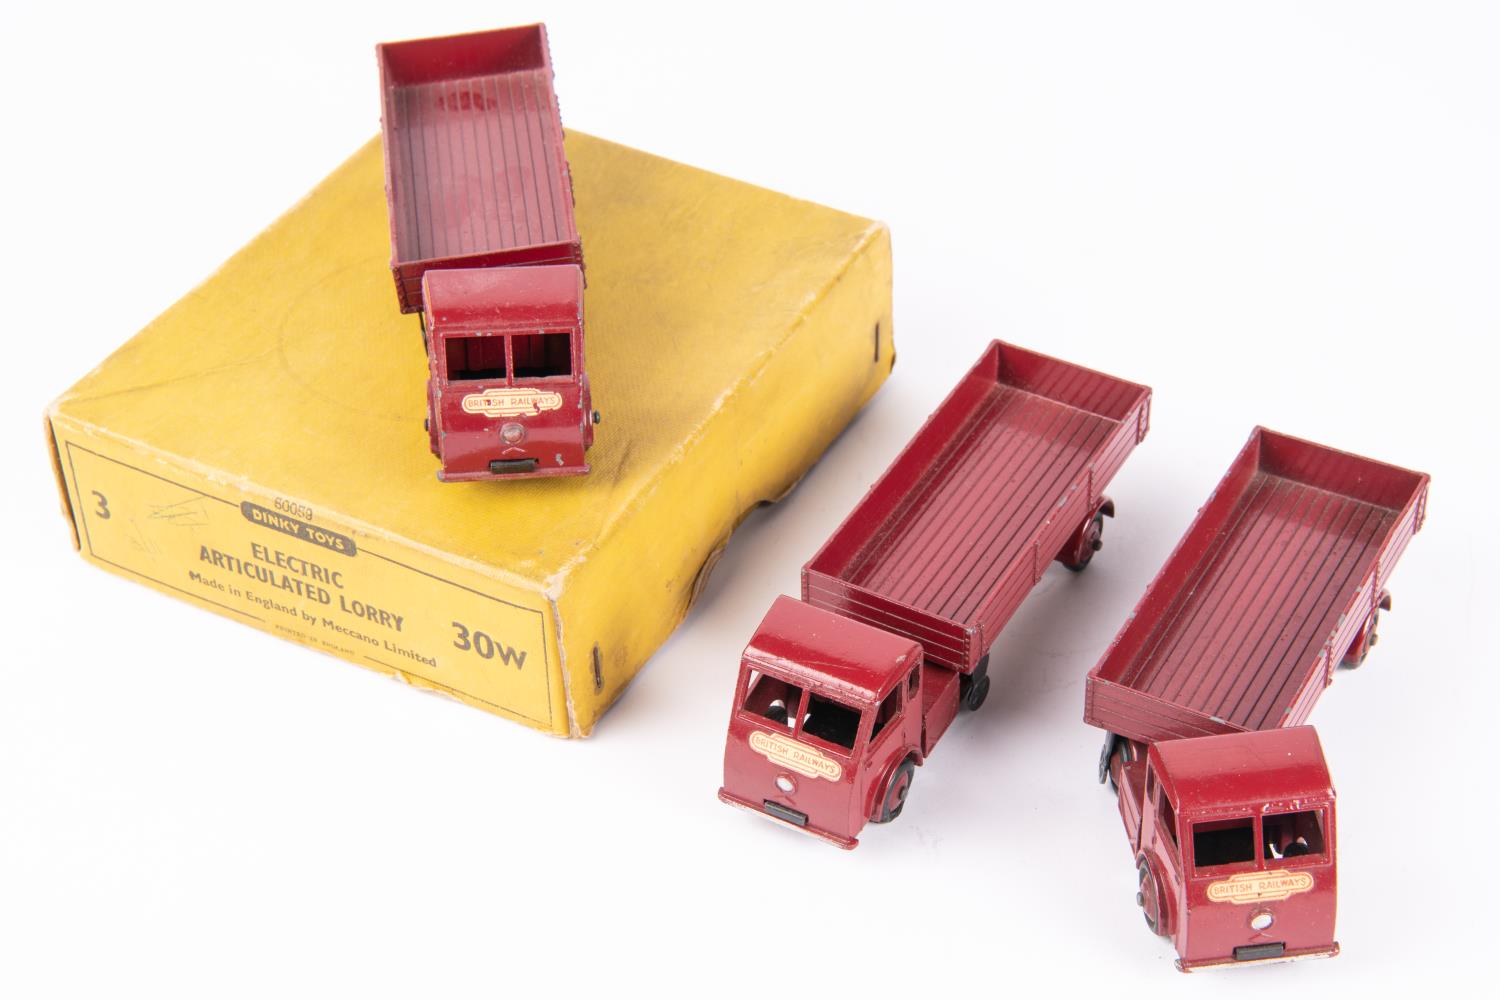 Dinky Toys Trade Box of 3 Electric Articulated Lorry (Hindle-Smart Helecs) (30w). In maroon with